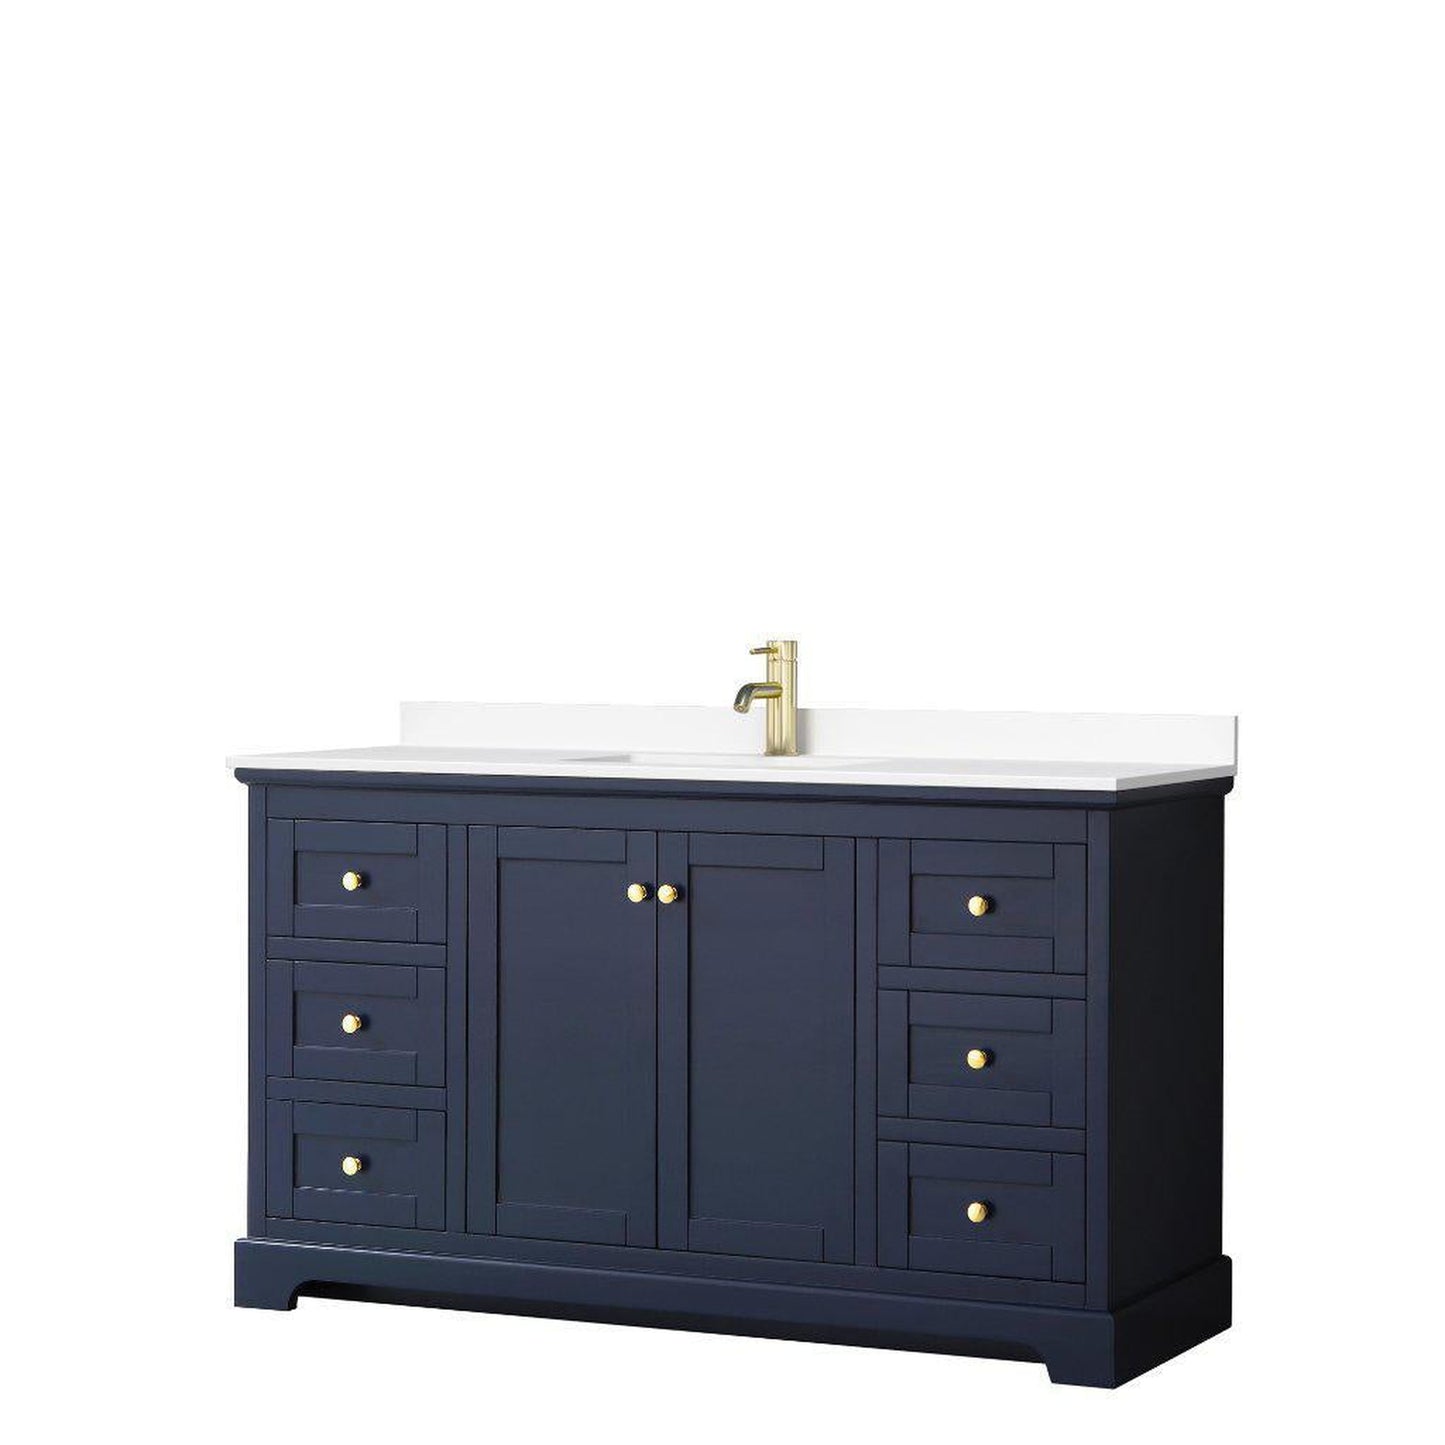 Wyndham Collection Avery 60" Dark Blue Single Bathroom Vanity With White Cultured Marble Countertop With 1-Hole Faucet And Square Sink